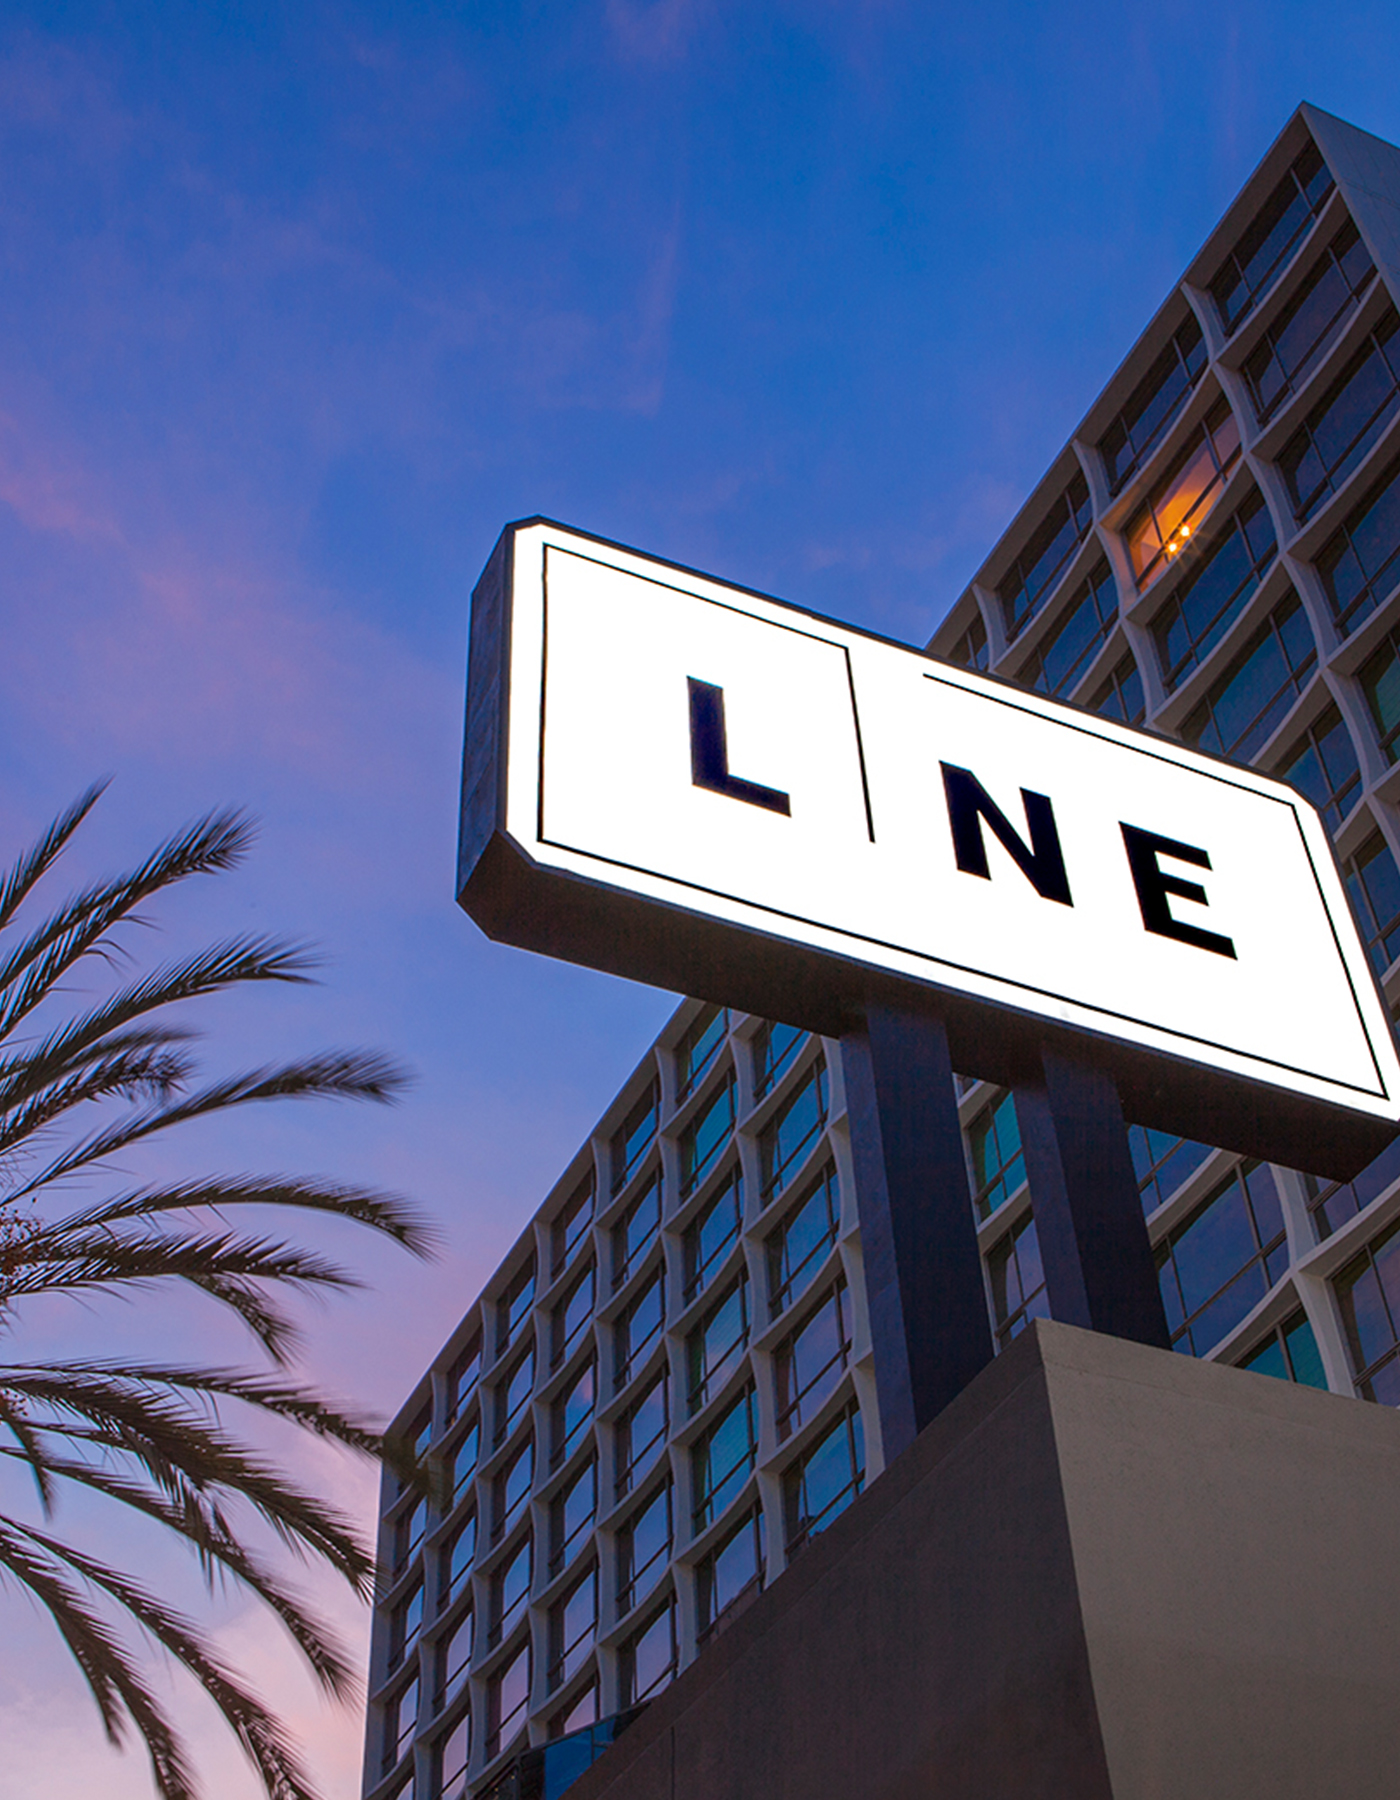 Signboard of Line Hotel